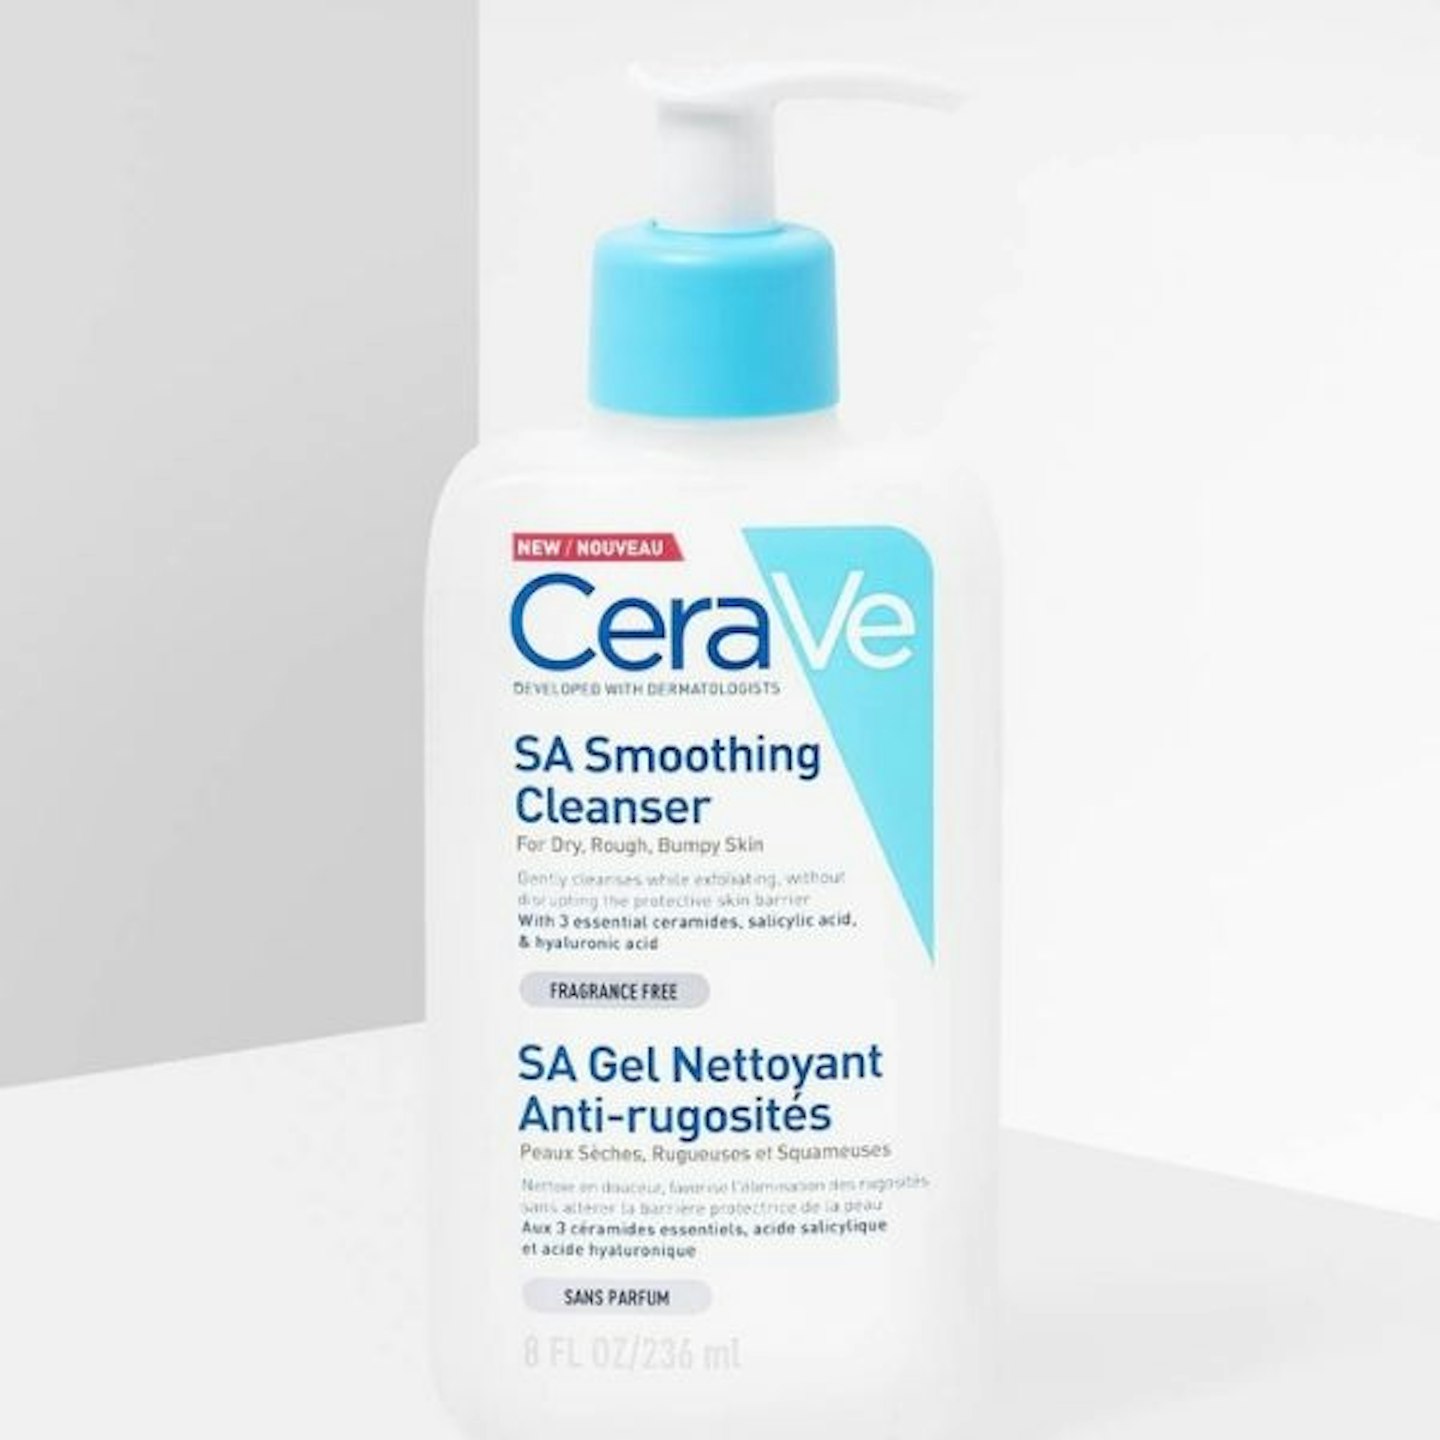 Cerave SA Smoothing Cleanser with Salicylic Acid